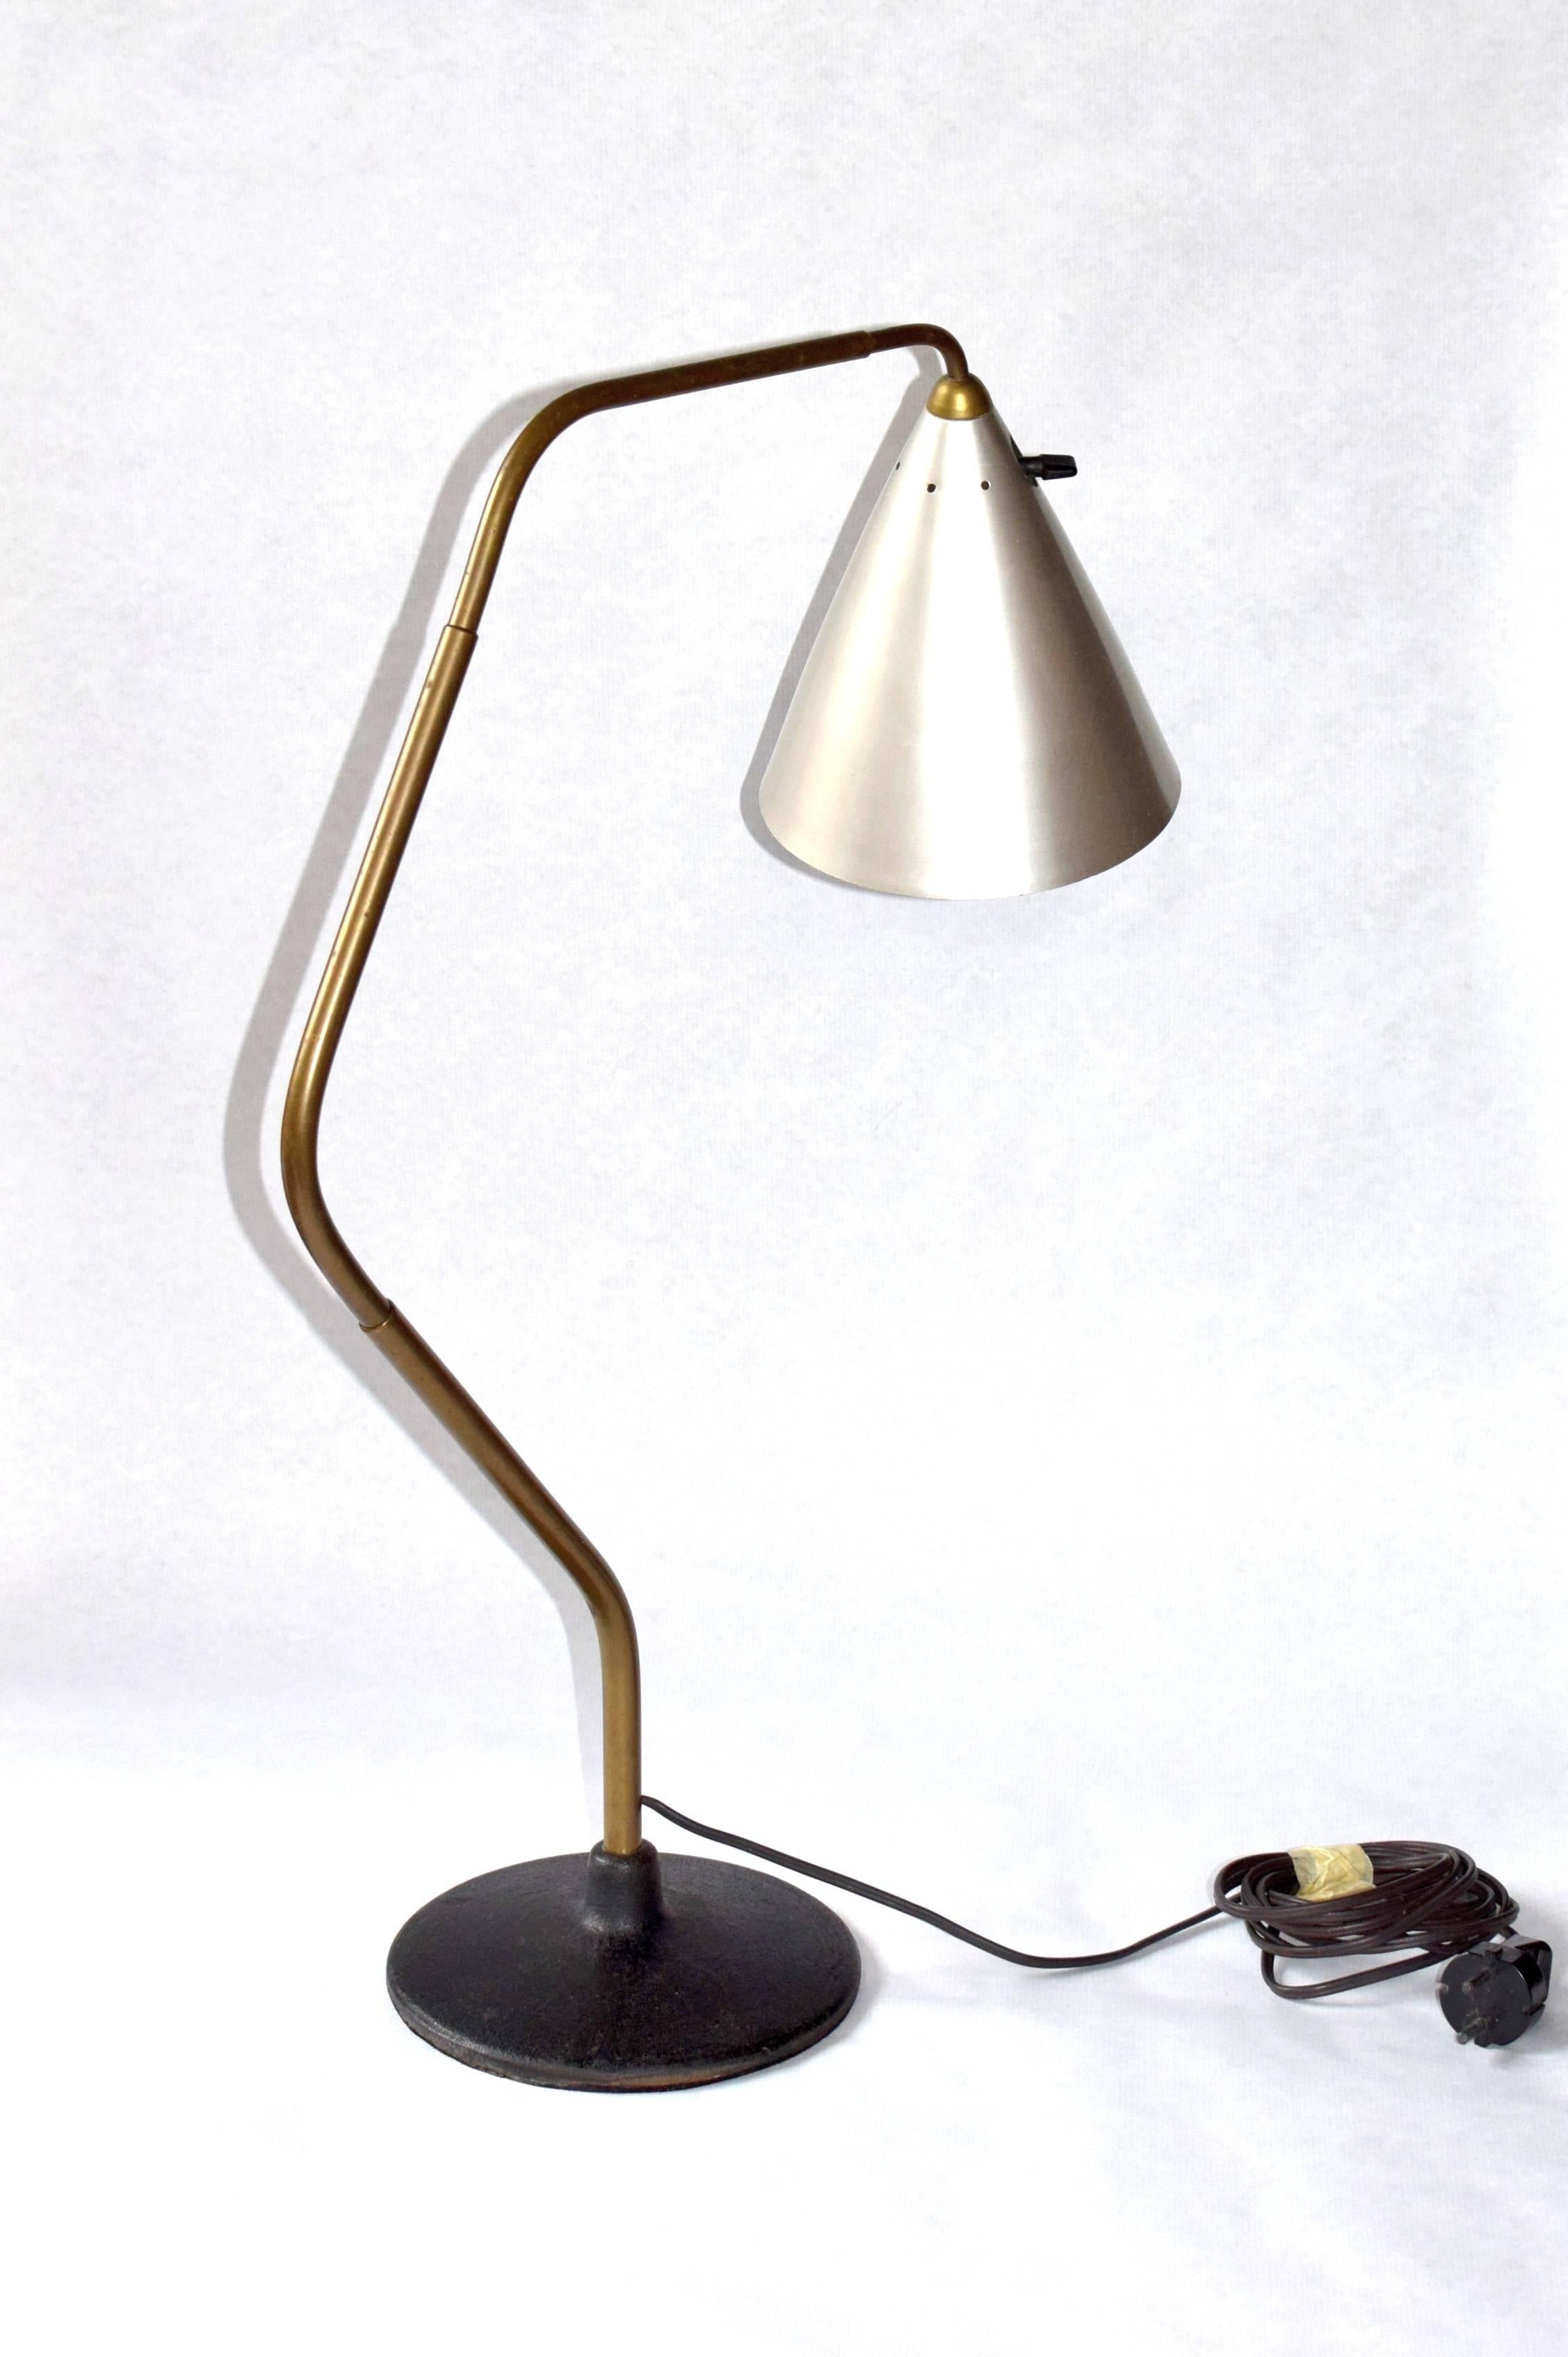 Museal prototype of the flamingo table lamp presented for the first time at the Triennale in 1951.
Contrary to lamps with flexible elements or hinge joints, the system developed by Hagenauer consisted of three (two obtuse angled and one